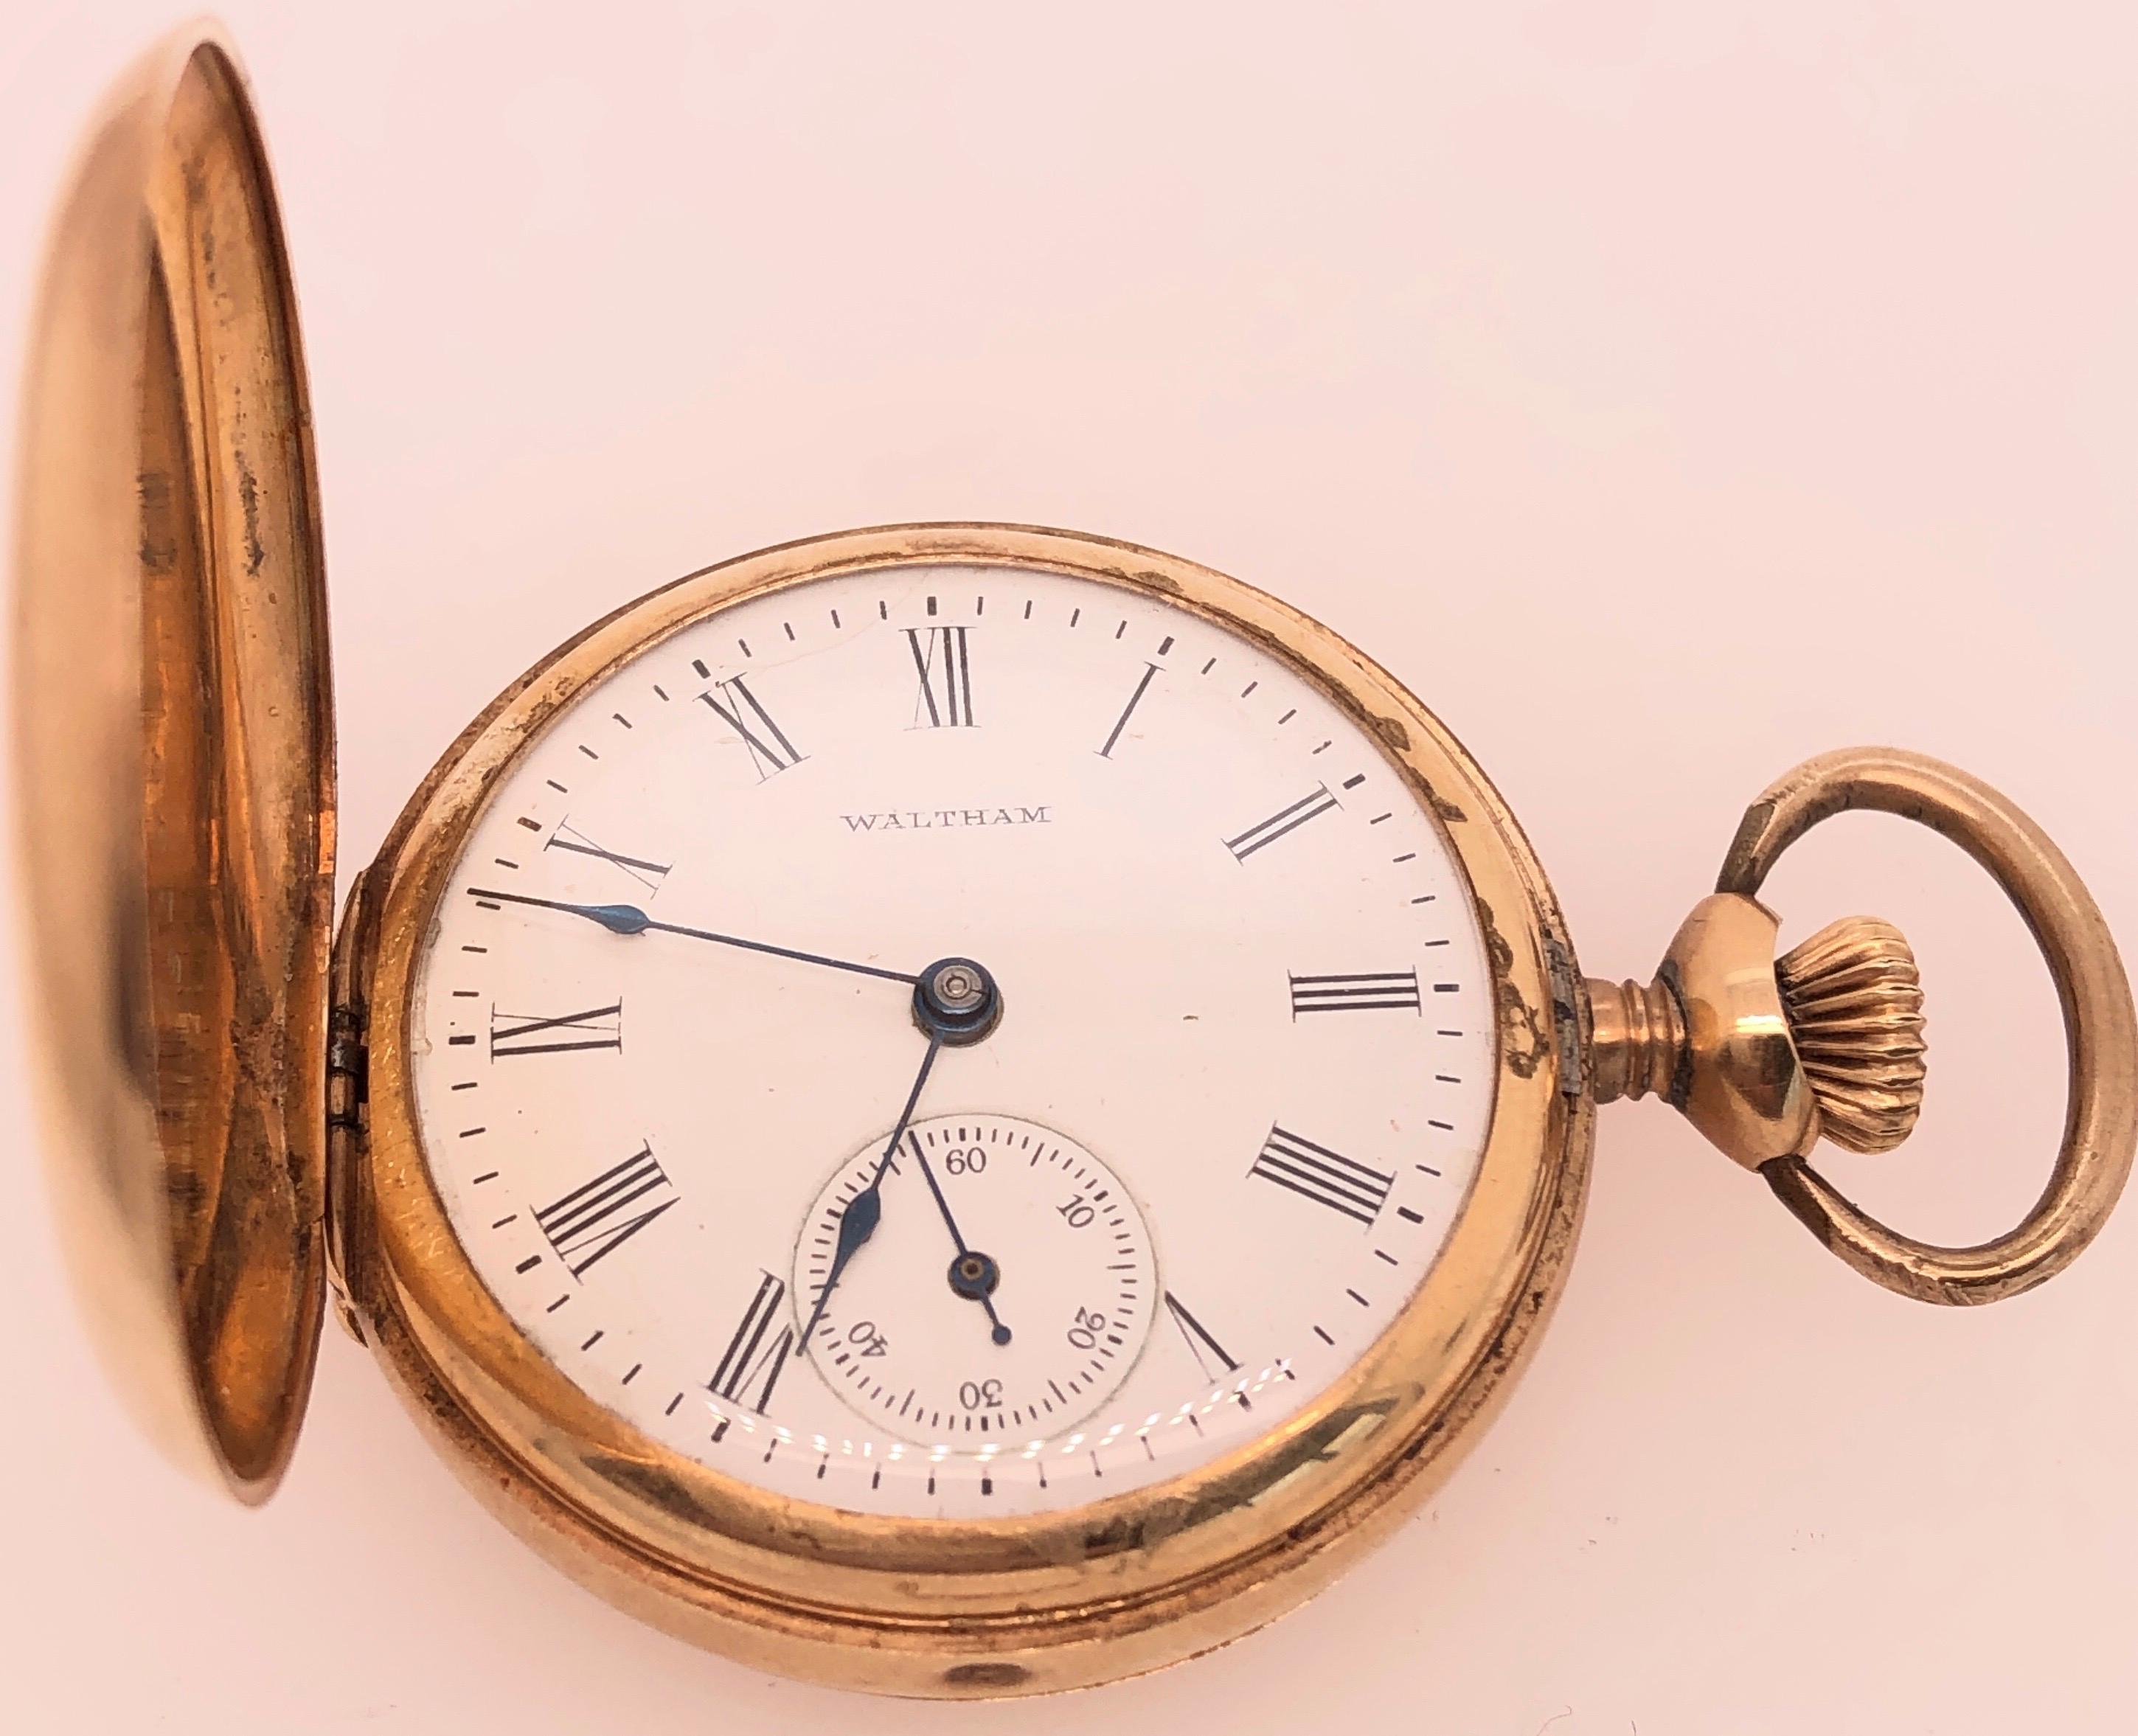 American Waltham Co. Antique Yellow Gold Pocket Watch.
Circa 1913, American Waltham & Company 32 mm 14 karat yellow gold pocket watch with case model number 5068138. Medallion style engraved design. Fifteen jeweled, grade 620 acid etched movement. 